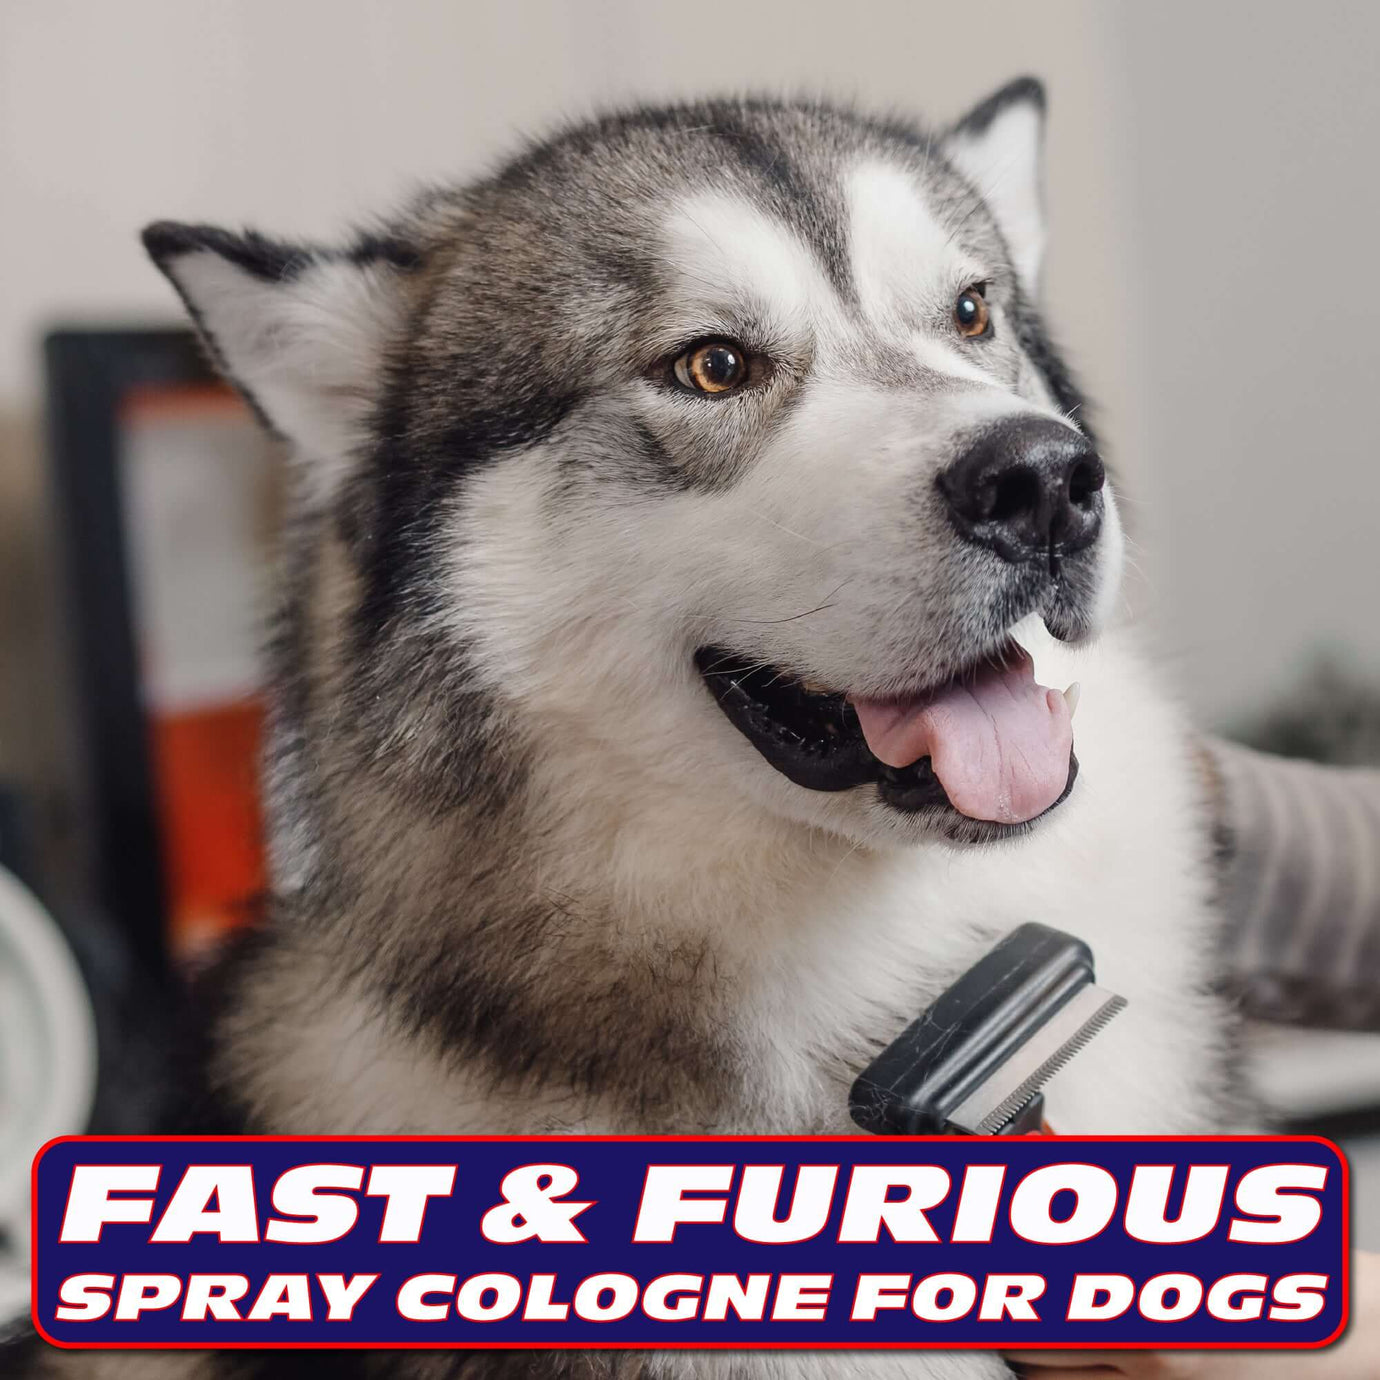 Fast & Furious Spray Cologne for Dogs